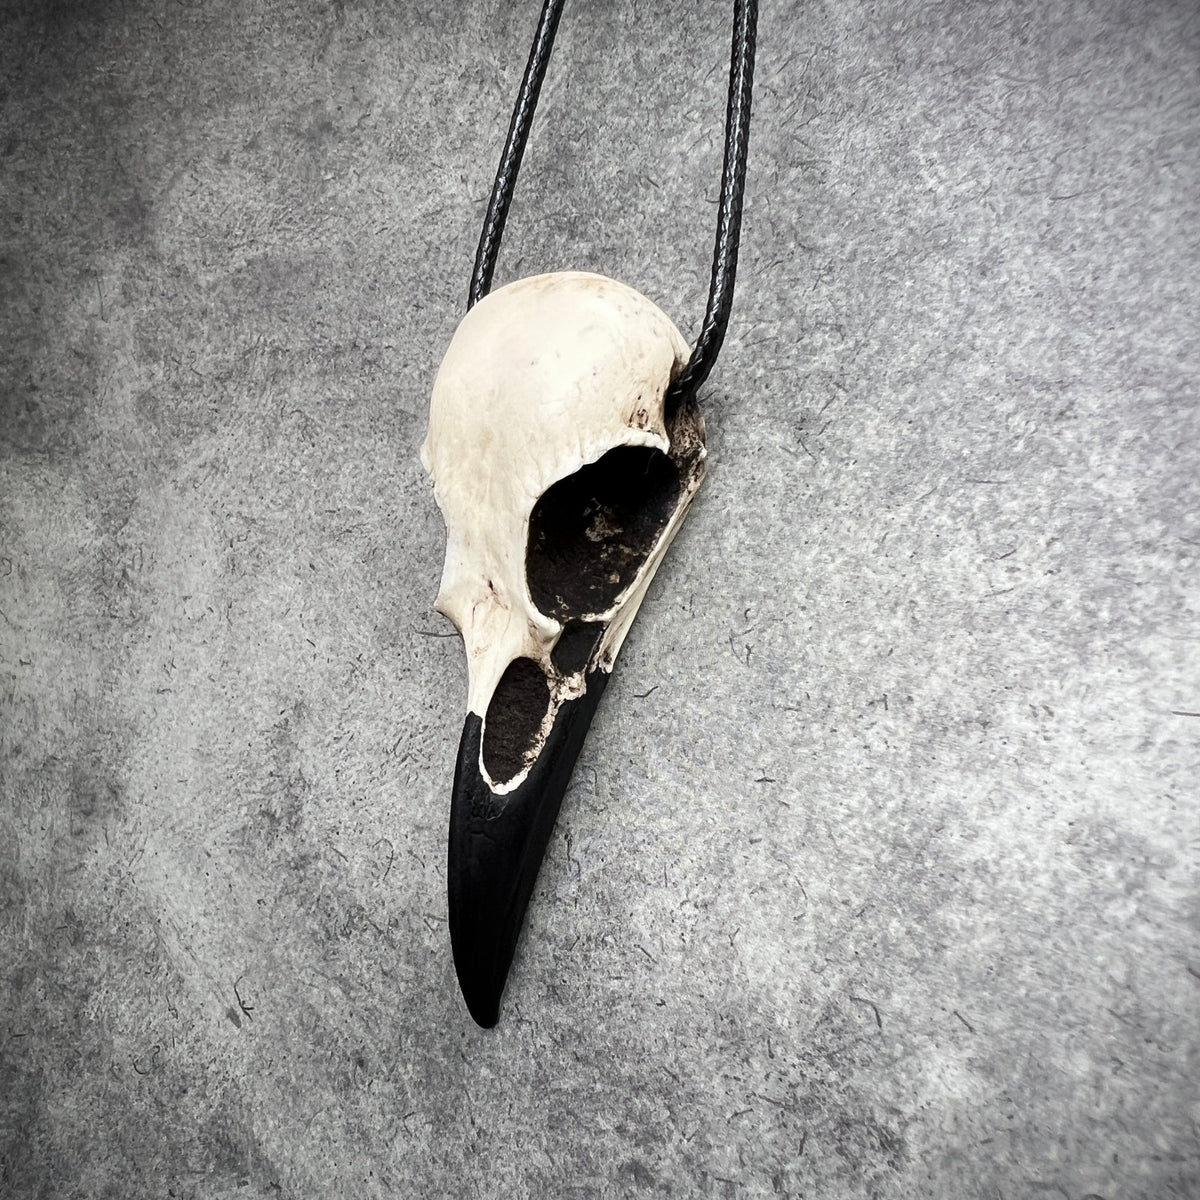 Animal skull jewelry bone clone cast resin replica of a real raven. Bird skull necklaces and raven skull pendants for goth and witchy women